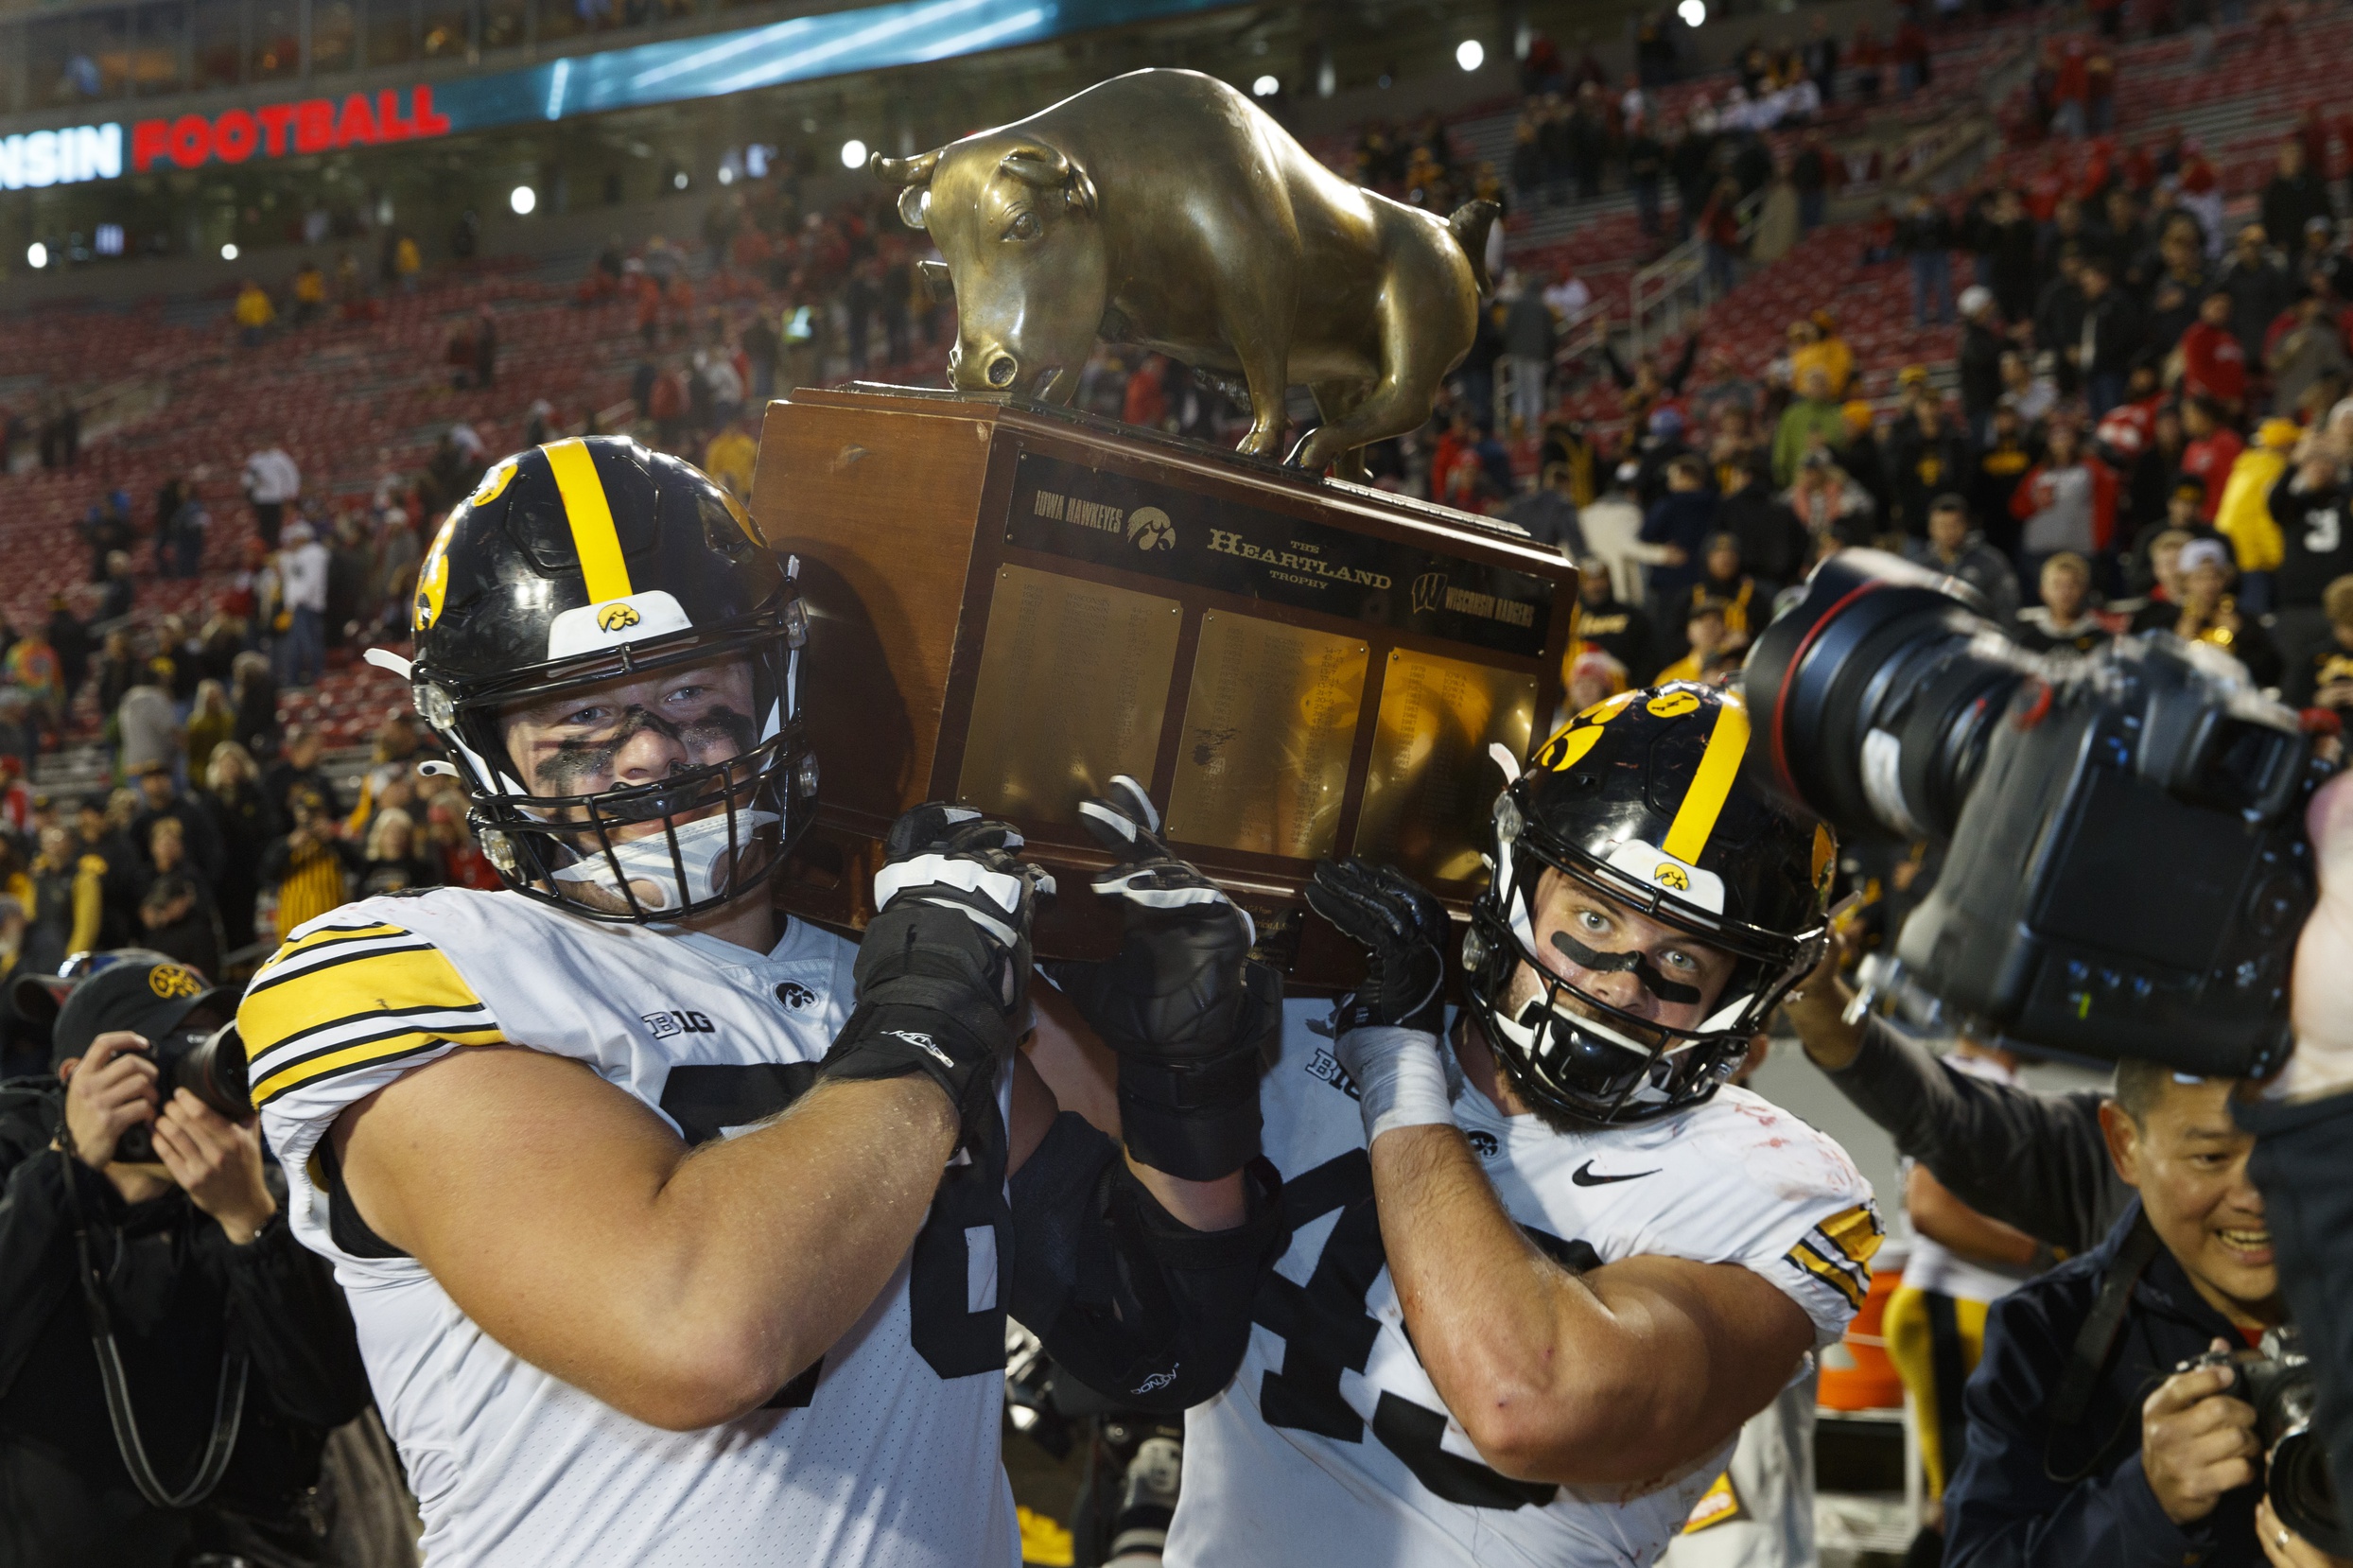 Iowa now has the keys to the driver's seat in the Big Ten West after a big 15-6 victory over Wisconsin on the road.